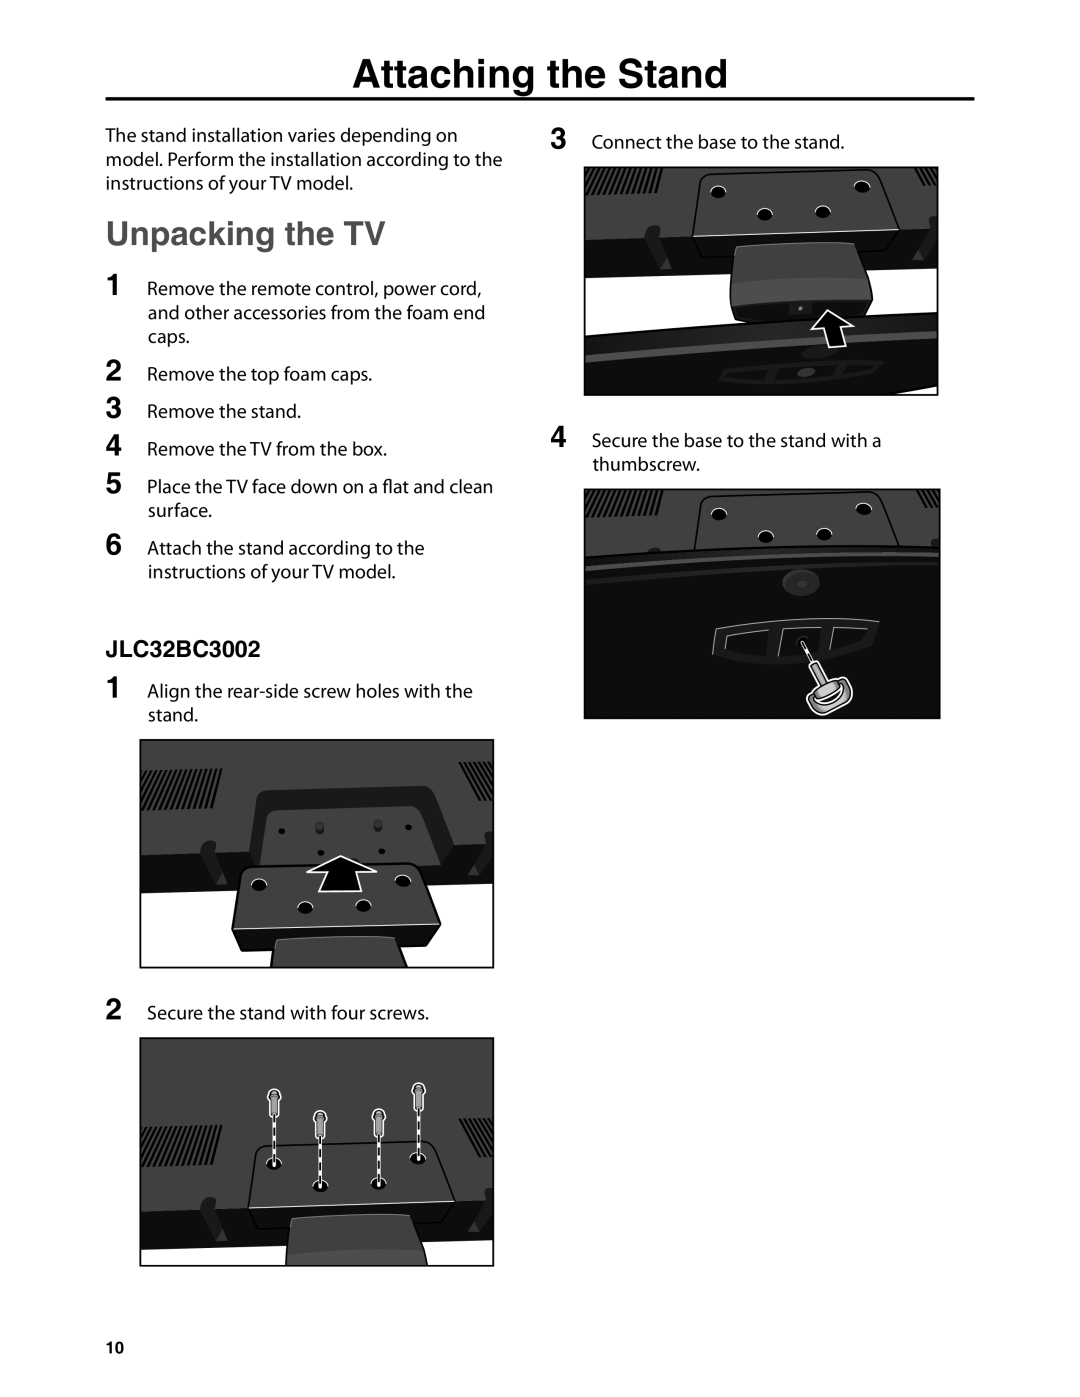 JVC JLC37BC3002-B, JLC47BC3002-B, JLC42BC3002, JLC32BC3002-B, JLC32BC3002B Attaching the Stand, Unpacking the TV 